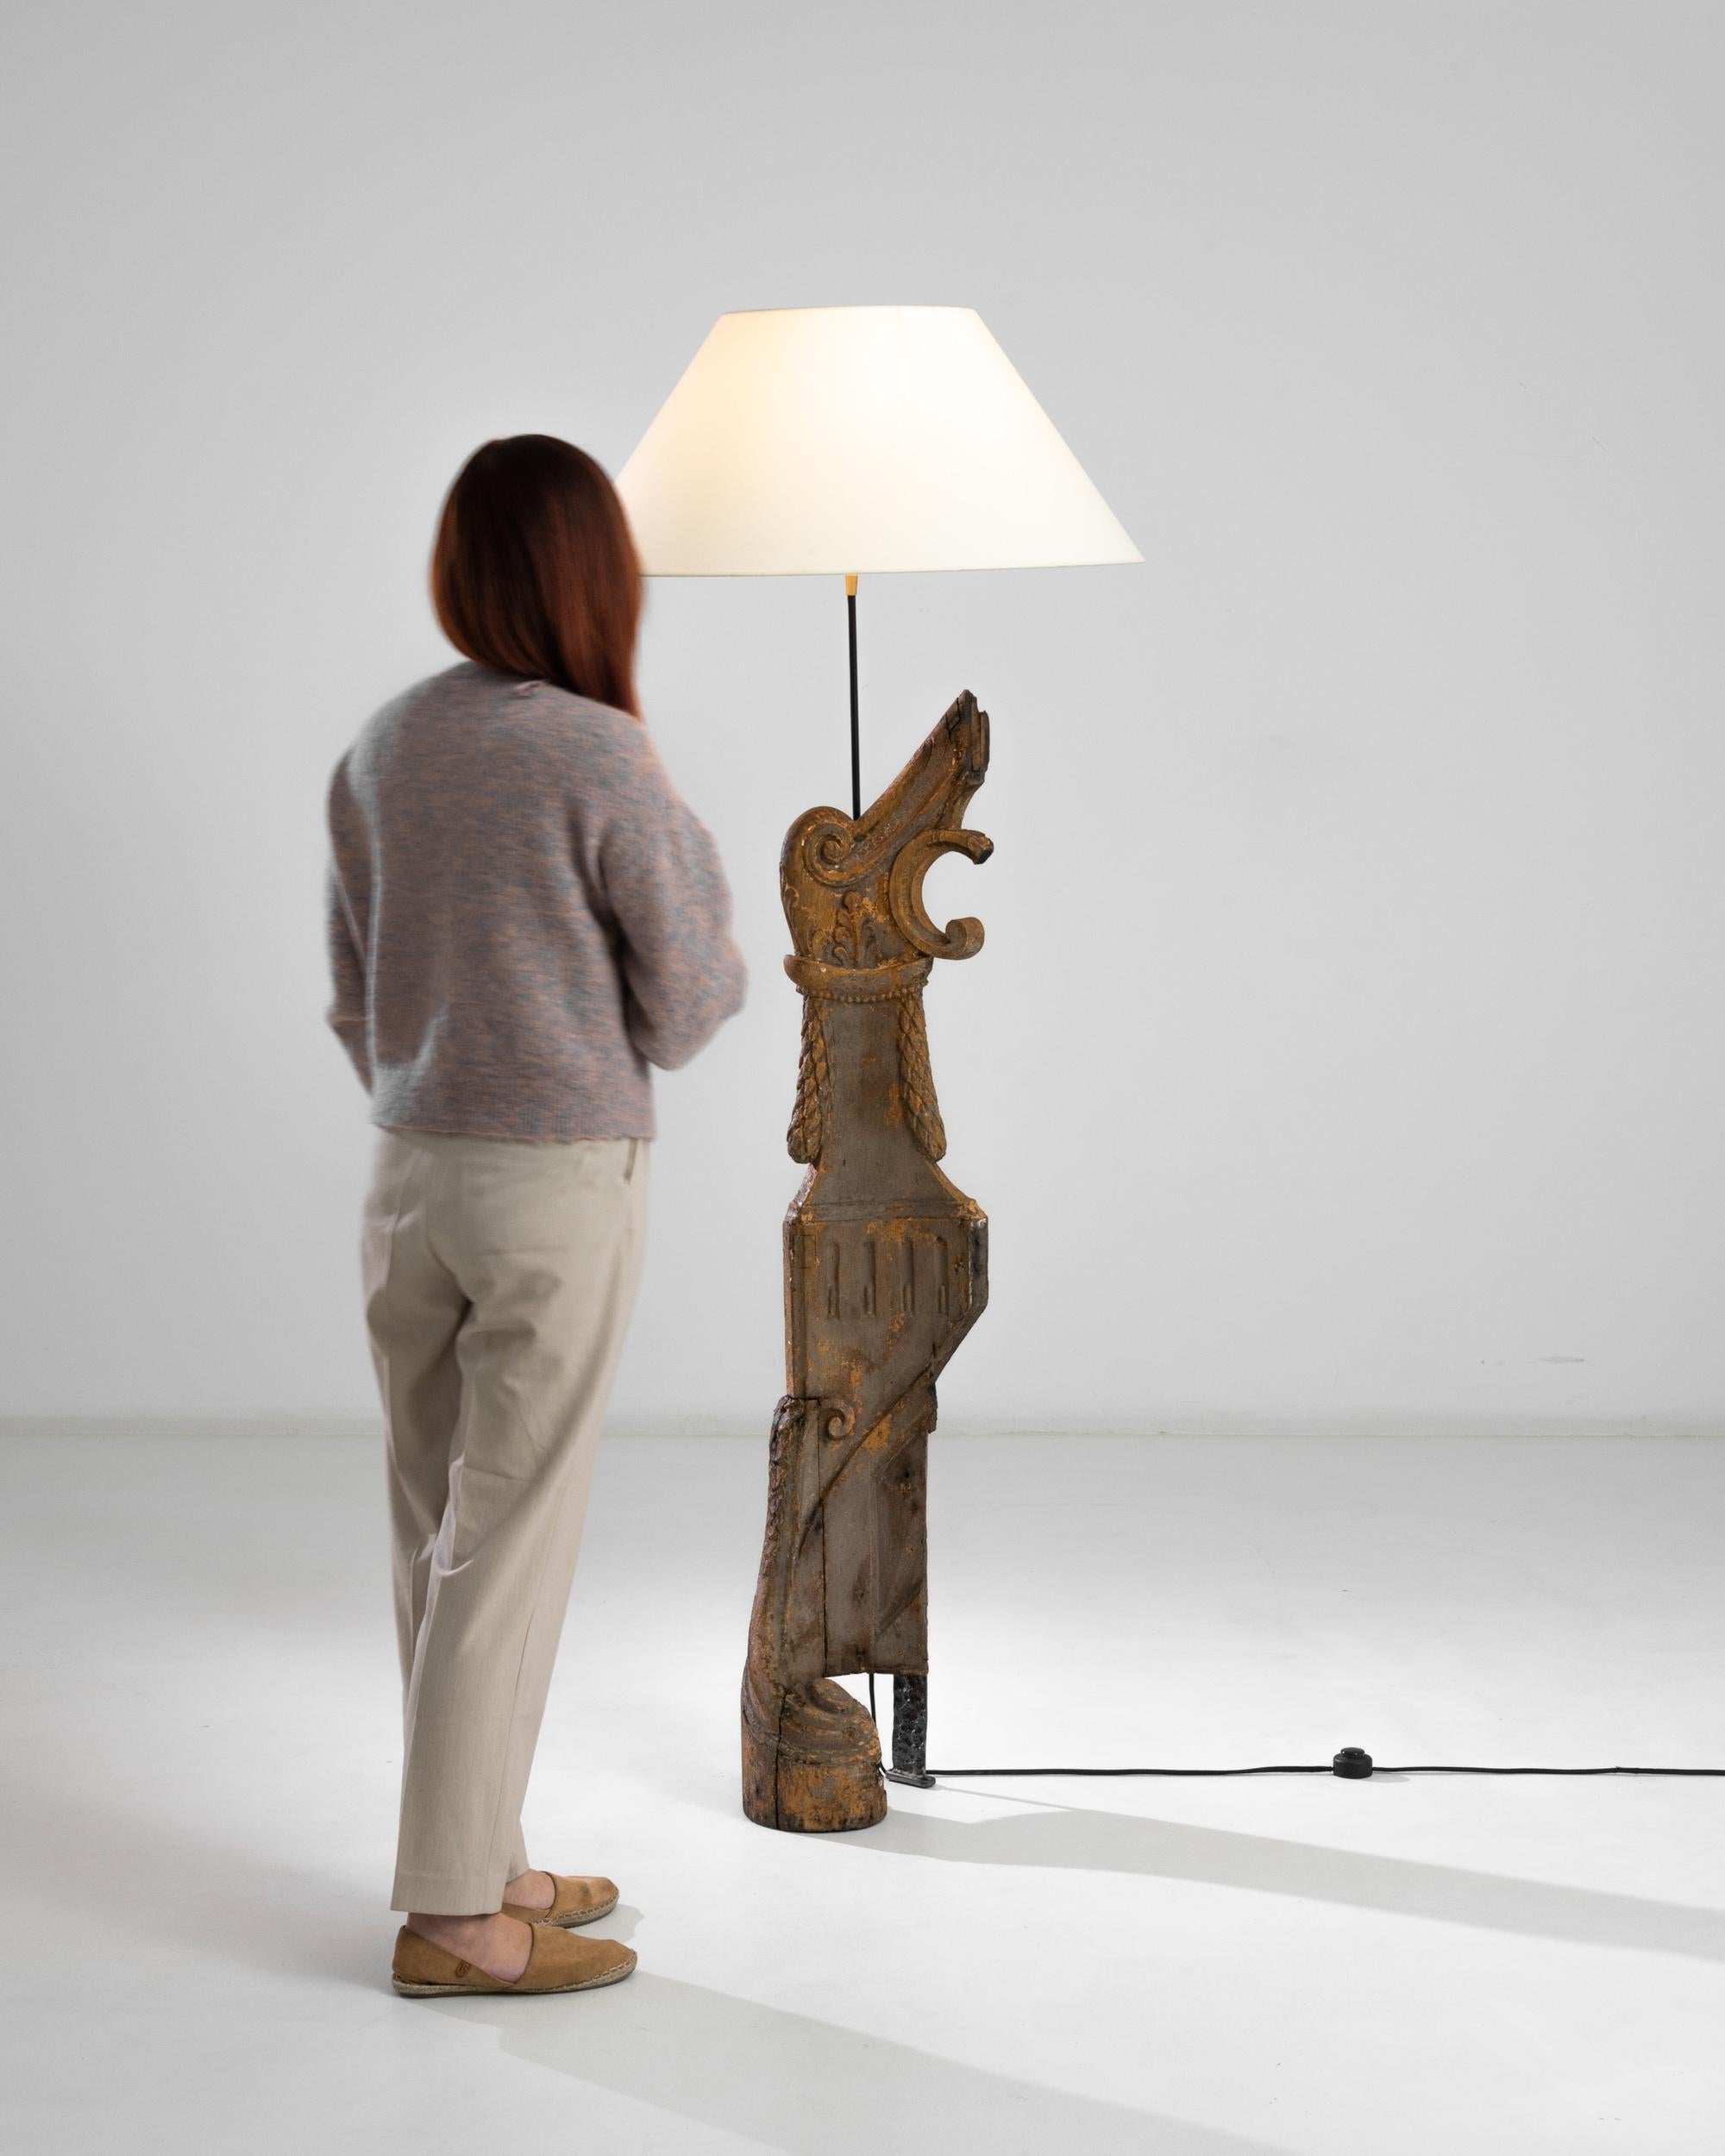 A wooden and metal floor lamp from France, produced circa 1800. At a height slightly under six feet, this tall floor lamp will both illuminate while animating the imagination. The abstract figure carved out of wood, looks like an image of an ancient